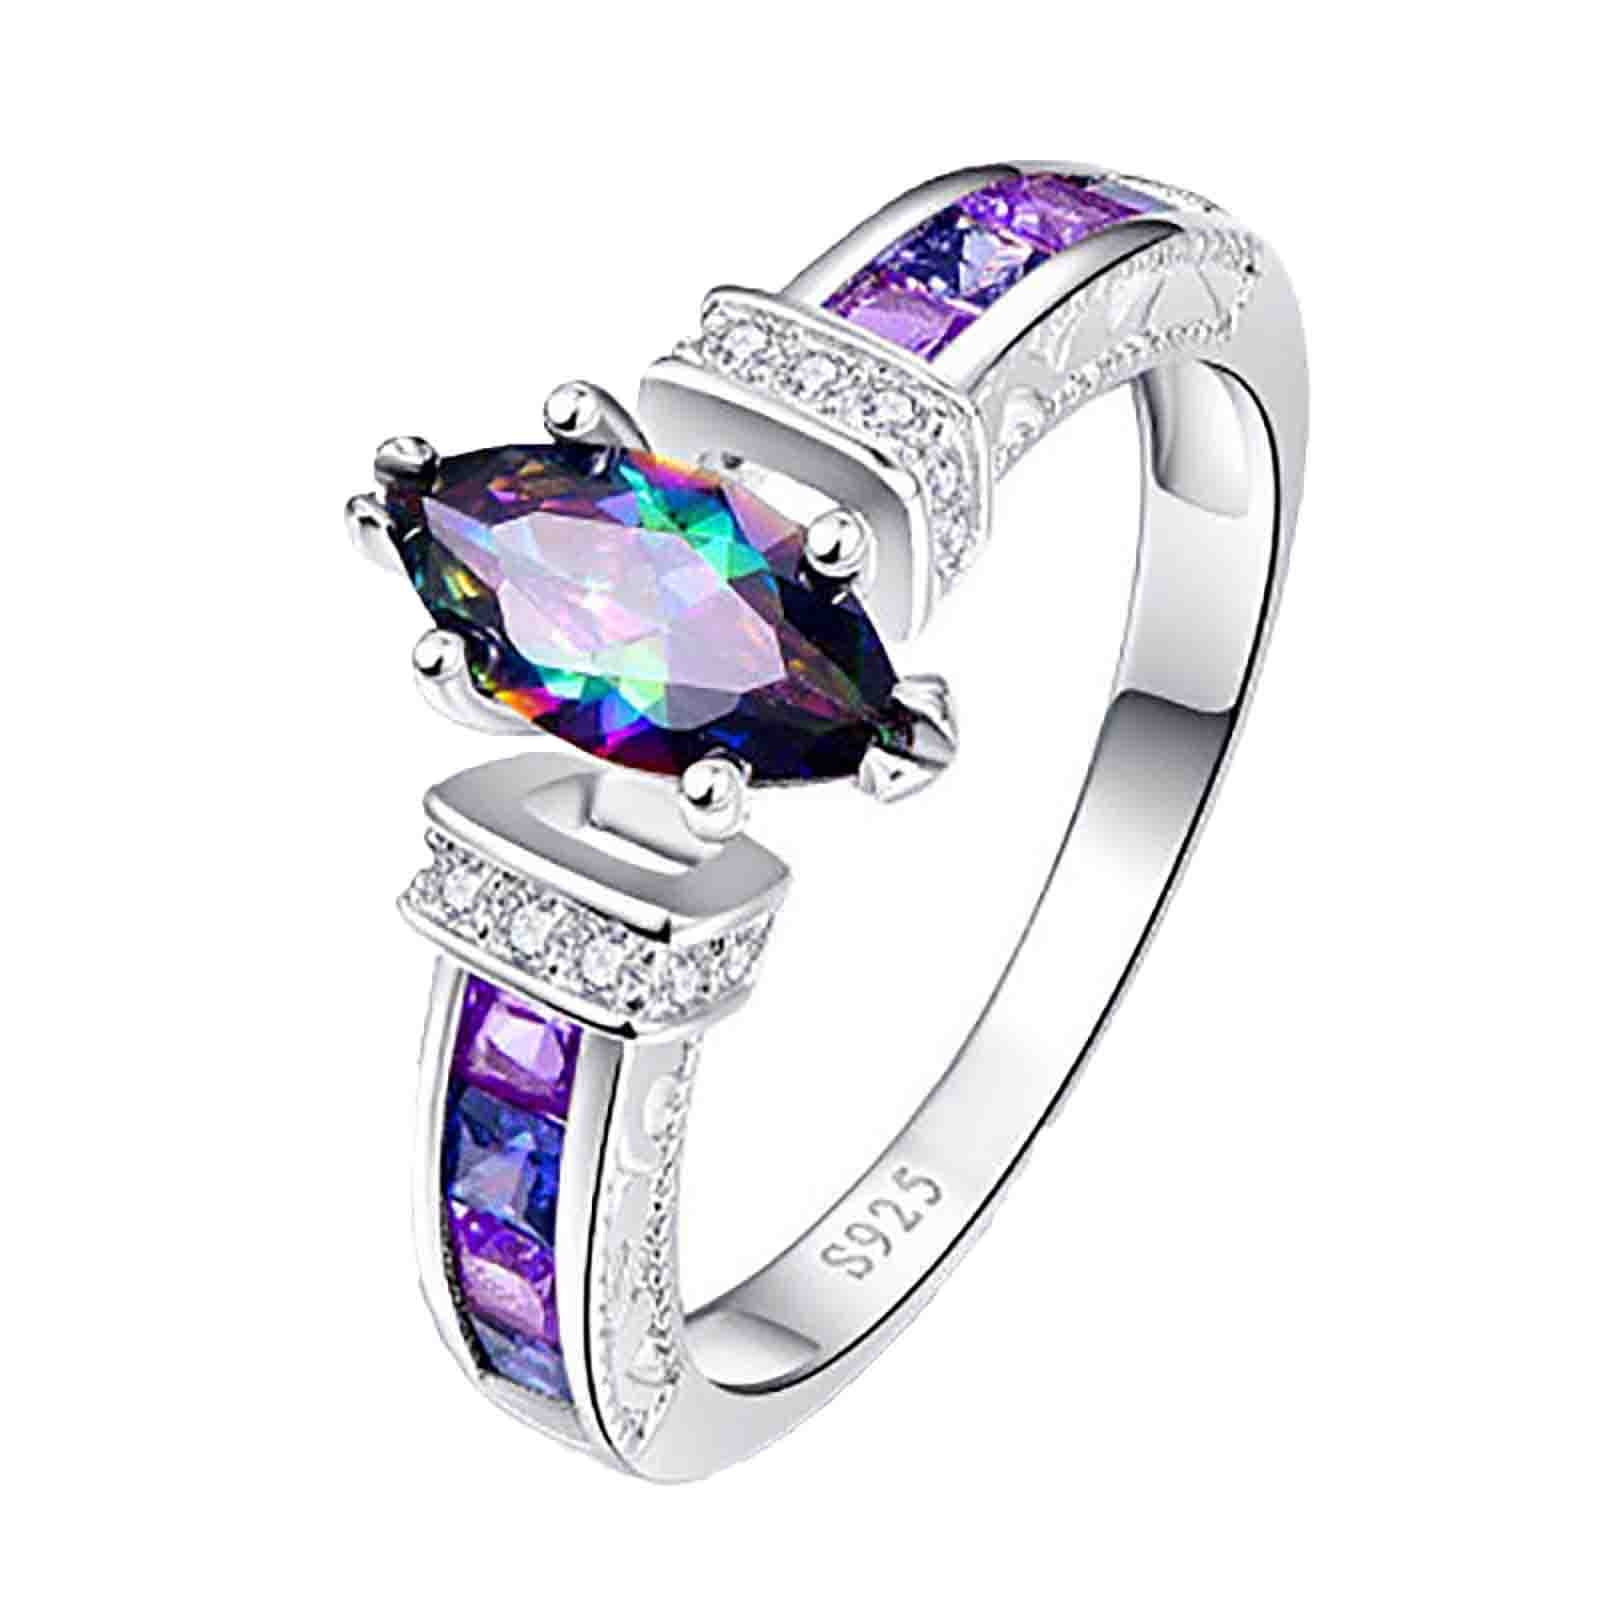 925 Silver Plated White Opal CZ Woman Jewelry Wedding Engagement Ring Size 6-10 9